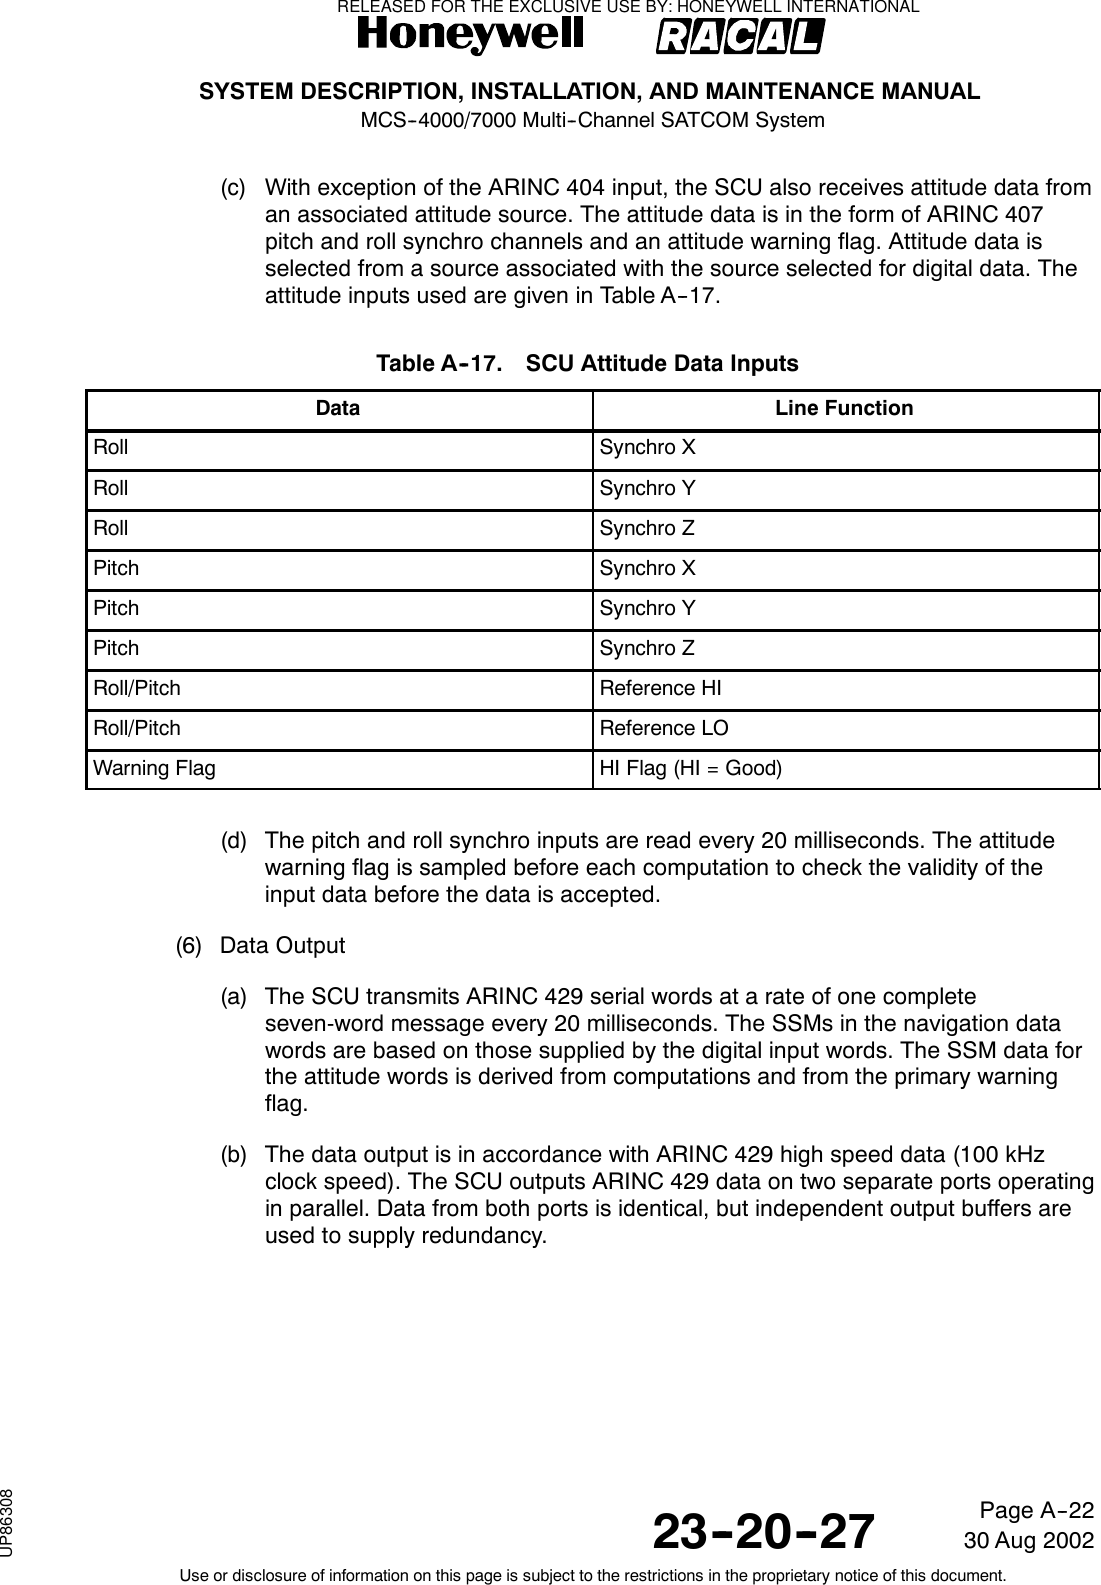 SYSTEM DESCRIPTION, INSTALLATION, AND MAINTENANCE MANUALMCS--4000/7000 Multi--Channel SATCOM System23--20--2730 Aug 2002Use or disclosure of information on this page is subject to the restrictions in the proprietary notice of this document.Page A--22(c) With exception of the ARINC 404 input, the SCU also receives attitude data froman associated attitude source. The attitude data is in the form of ARINC 407pitch and roll synchro channels and an attitude warning flag. Attitude data isselected from a source associated with the source selected for digital data. Theattitude inputs used are given in Table A--17.Table A--17. SCU Attitude Data InputsData Line FunctionRoll Synchro XRoll Synchro YRoll Synchro ZPitch Synchro XPitch Synchro YPitch Synchro ZRoll/Pitch Reference HIRoll/Pitch Reference LOWarning Flag HI Flag (HI = Good)(d) The pitch and roll synchro inputs are read every 20 milliseconds. The attitudewarning flag is sampled before each computation to check the validity of theinput data before the data is accepted.(6) Data Output(a) The SCU transmits ARINC 429 serial words at a rate of one completeseven-word message every 20 milliseconds. The SSMs in the navigation datawords are based on those supplied by the digital input words. The SSM data forthe attitude words is derived from computations and from the primary warningflag.(b) The data output is in accordance with ARINC 429 high speed data (100 kHzclock speed). The SCU outputs ARINC 429 data on two separate ports operatingin parallel. Data from both ports is identical, but independent output buffers areused to supply redundancy.RELEASED FOR THE EXCLUSIVE USE BY: HONEYWELL INTERNATIONALUP86308